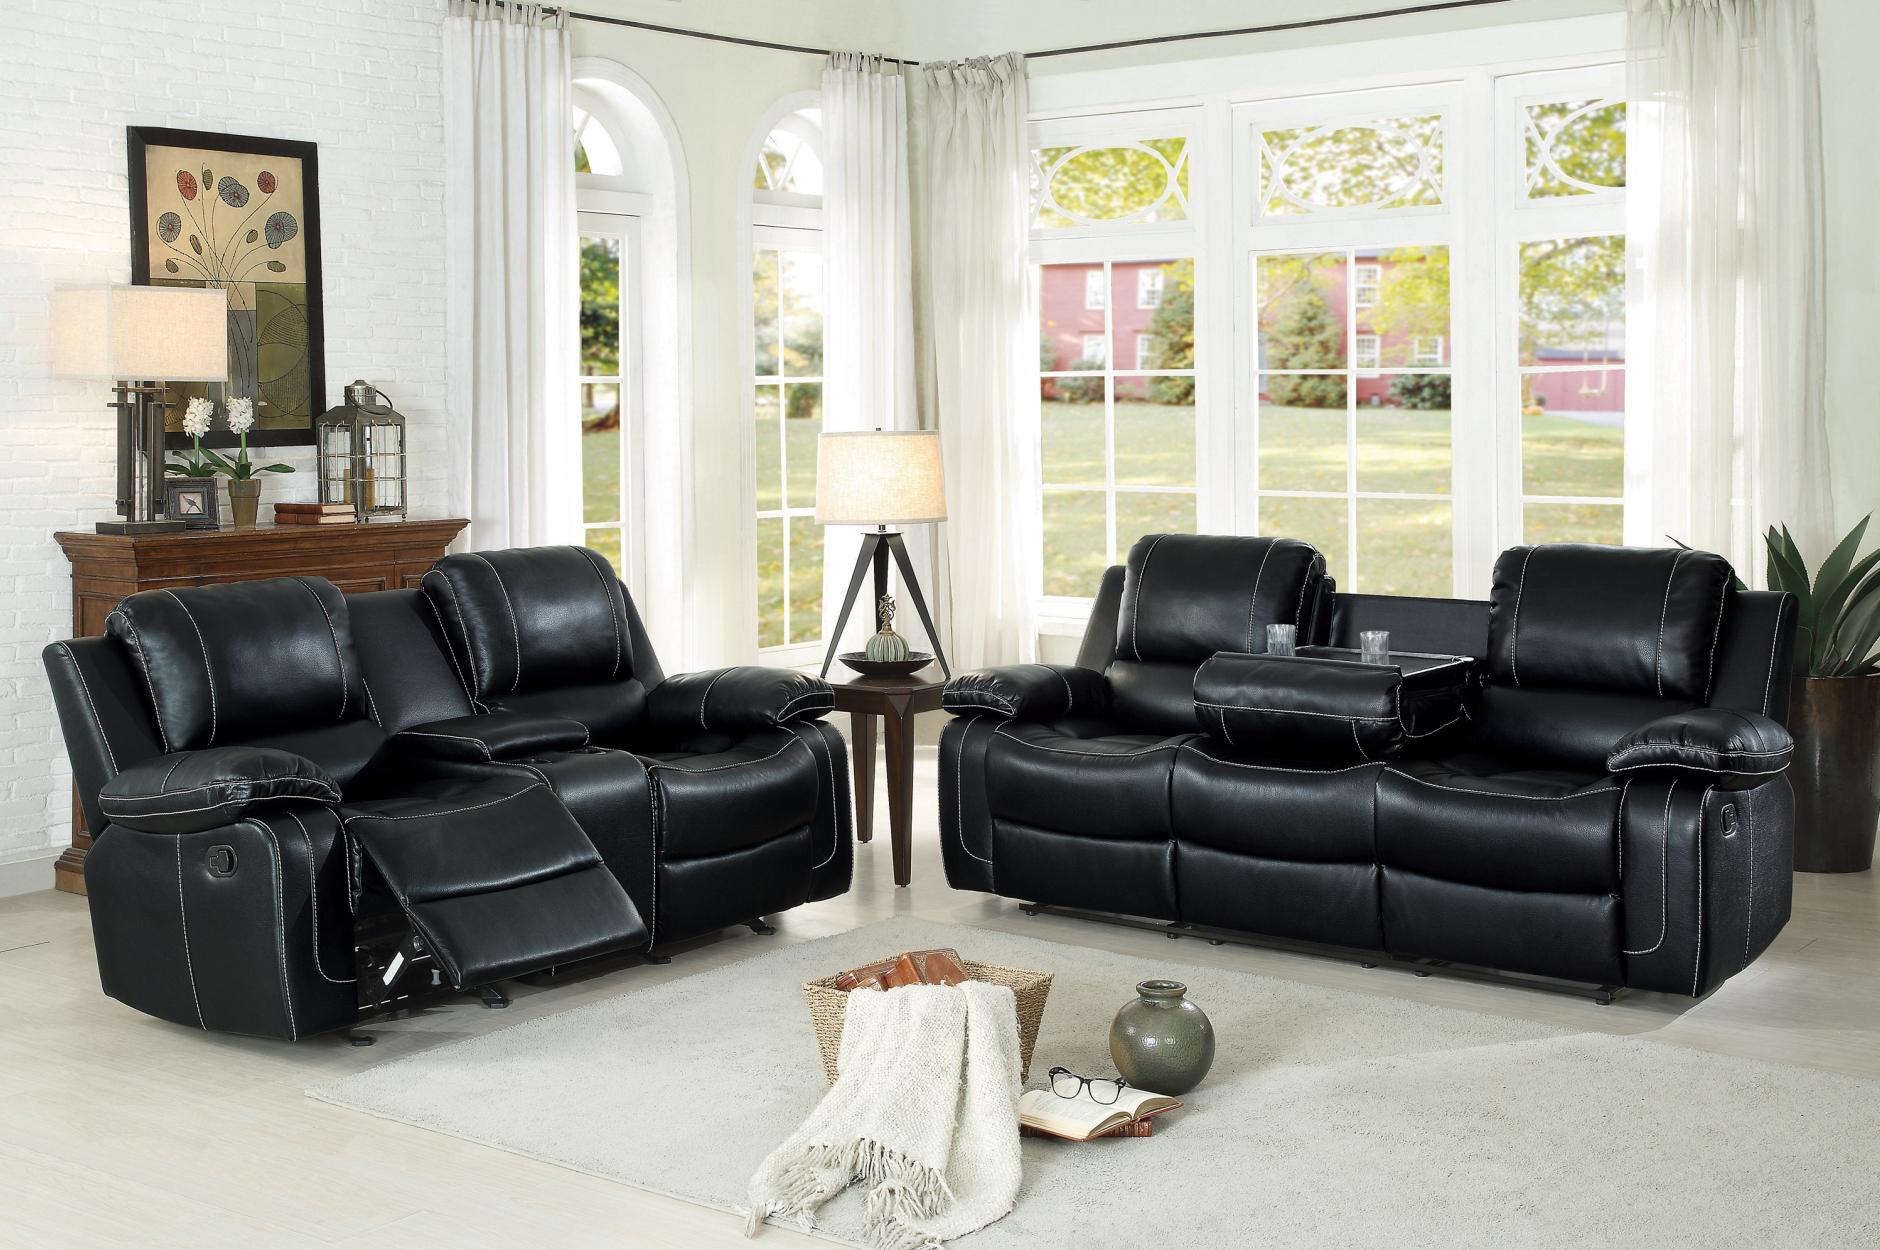 Contemporary, Modern Reclining Sofa and Loveseat Oriole 8334BLK-3+2 in Black Faux Leather